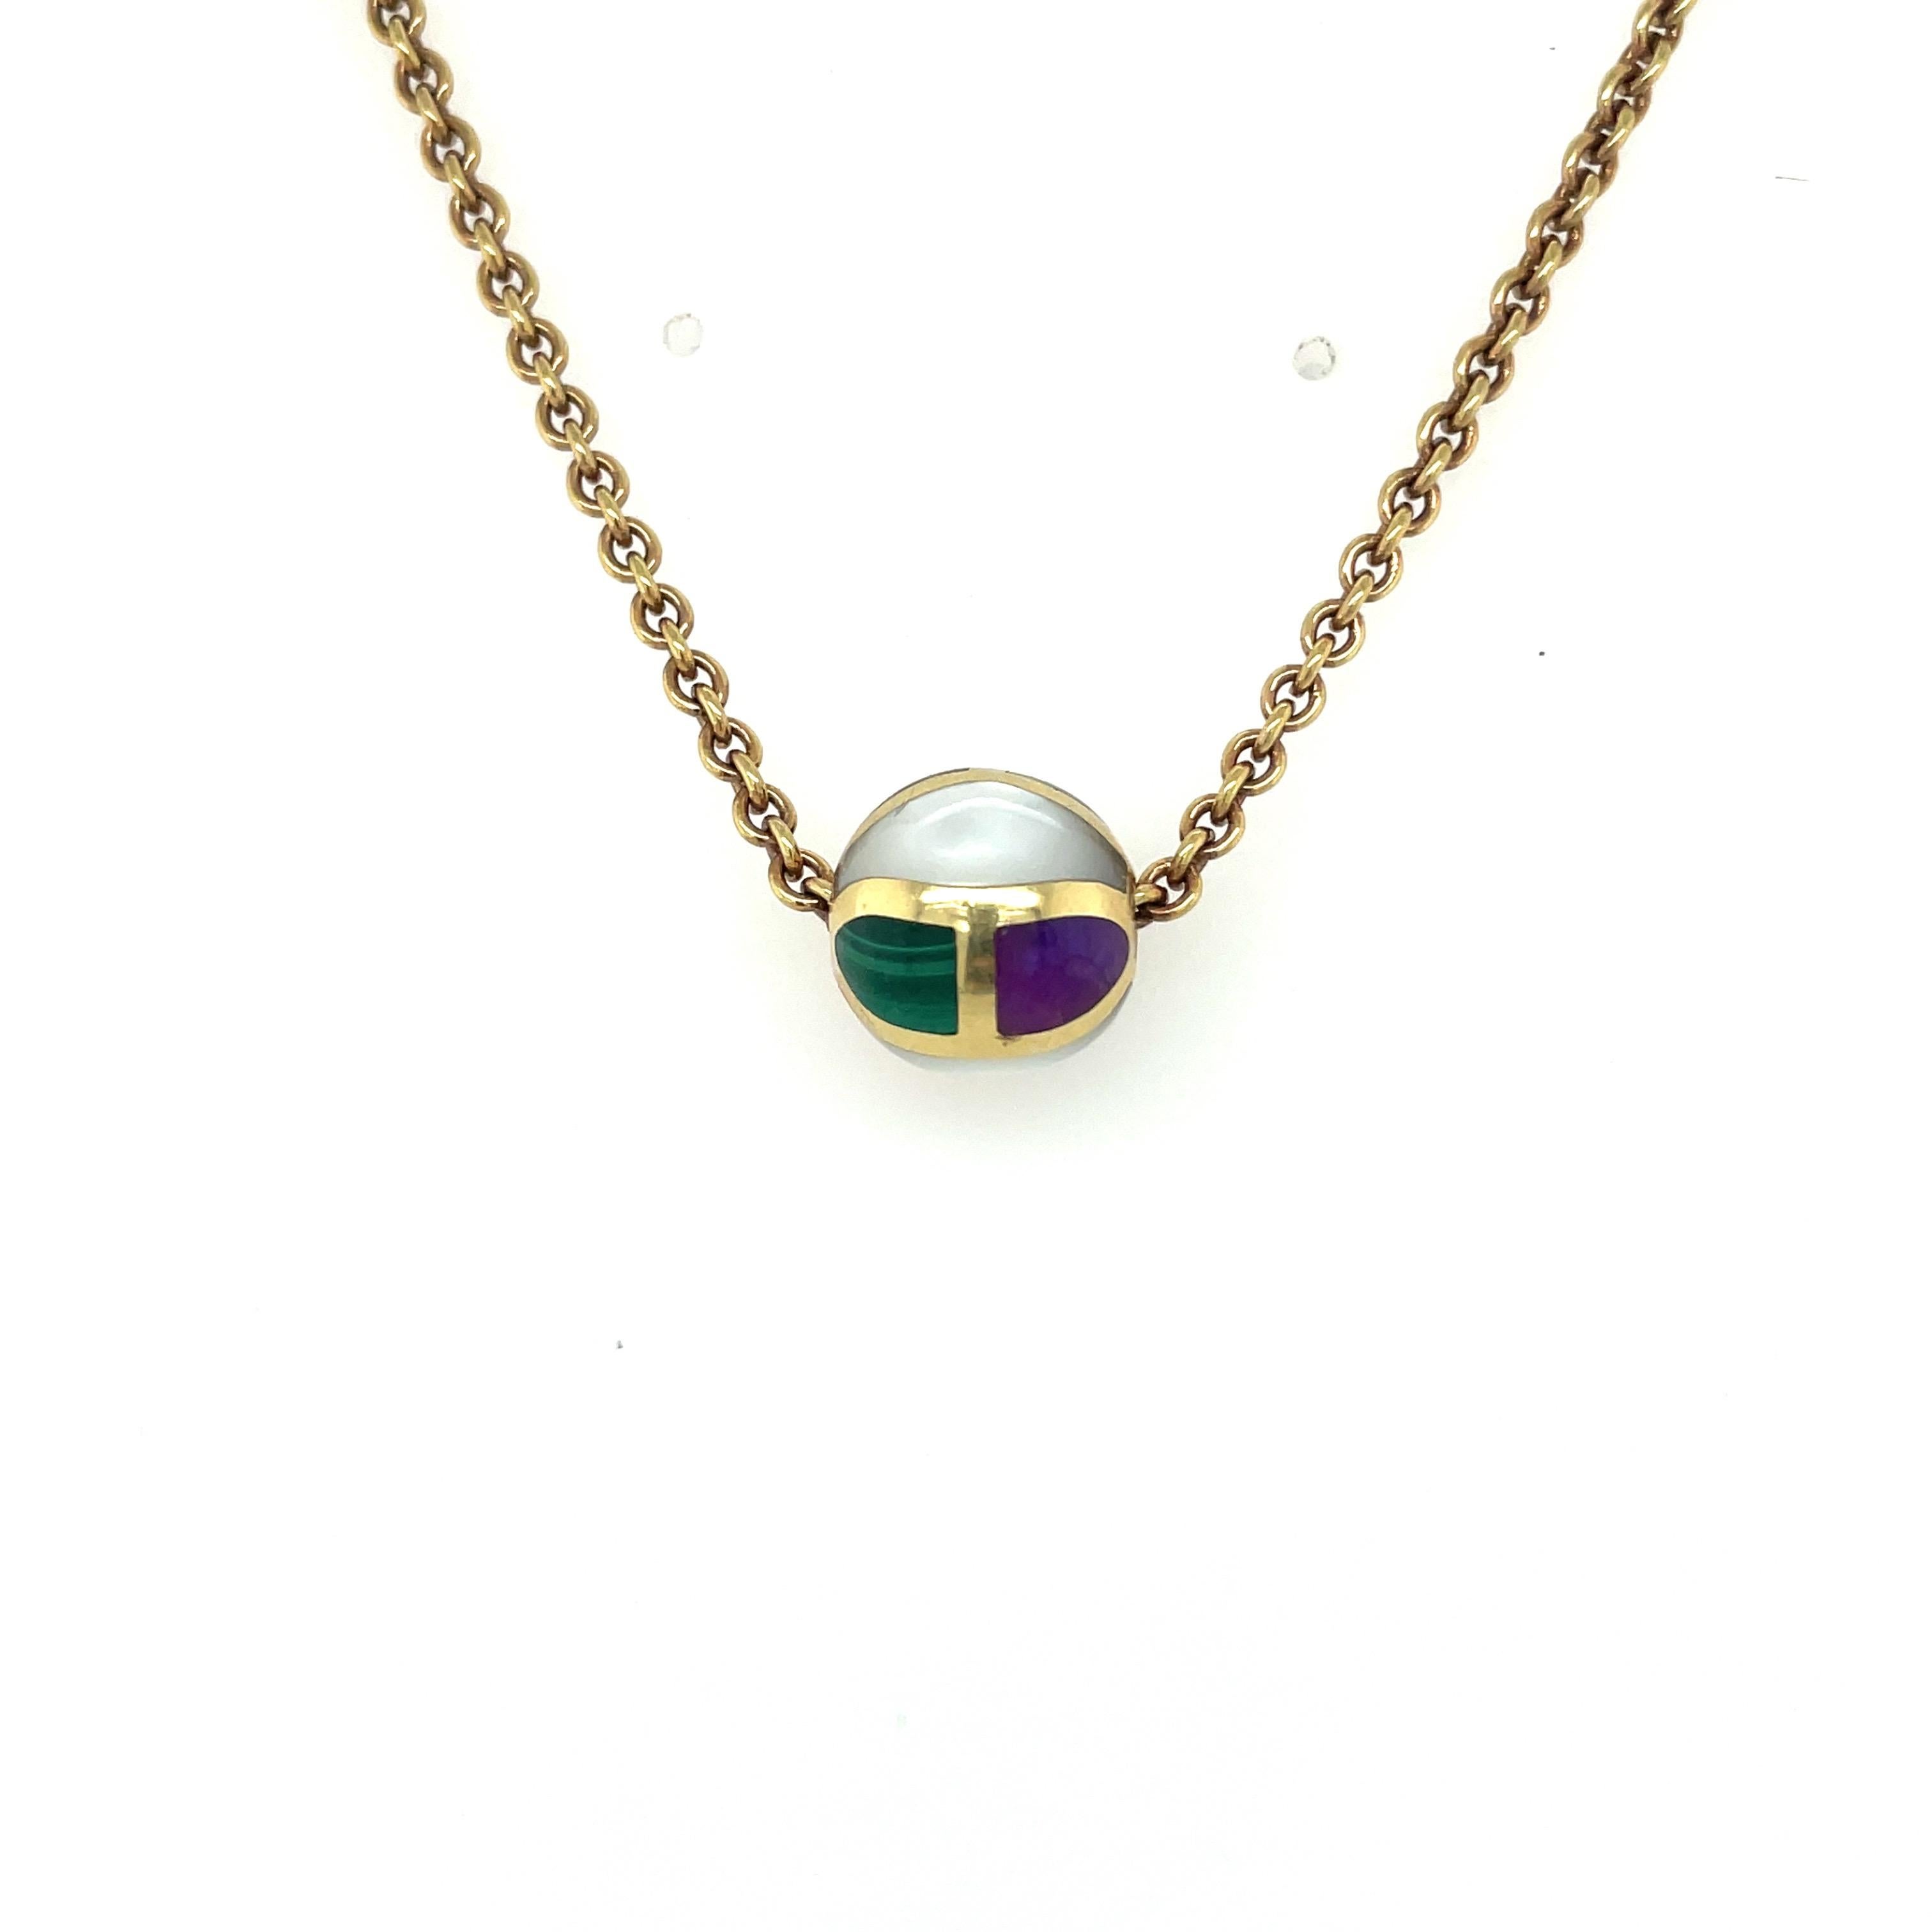 Designed by Asch Grossbardt, this is a very wearable pendant necklace. Designed with a 12 mm yellow gold bead that has been inlaid with mother of pearl, coral, malachite, jasper, onyx and lapis. Each stone section is framed in a shiny yellow gold.